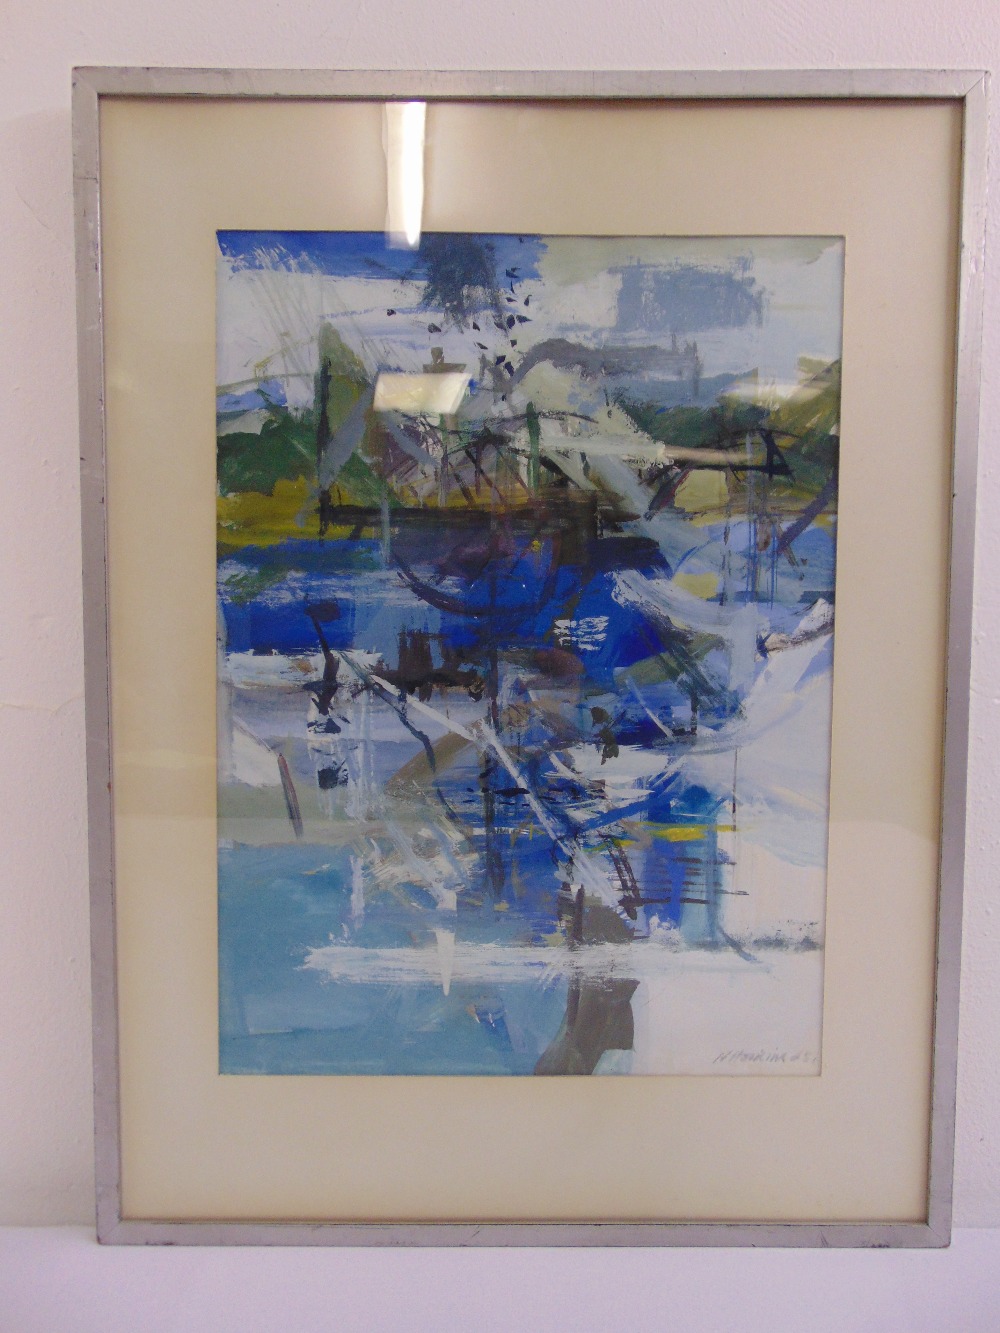 Ned Hoskins 1939 framed and glazed mixed media modern abstract, signed bottom right, 44 x 32cm